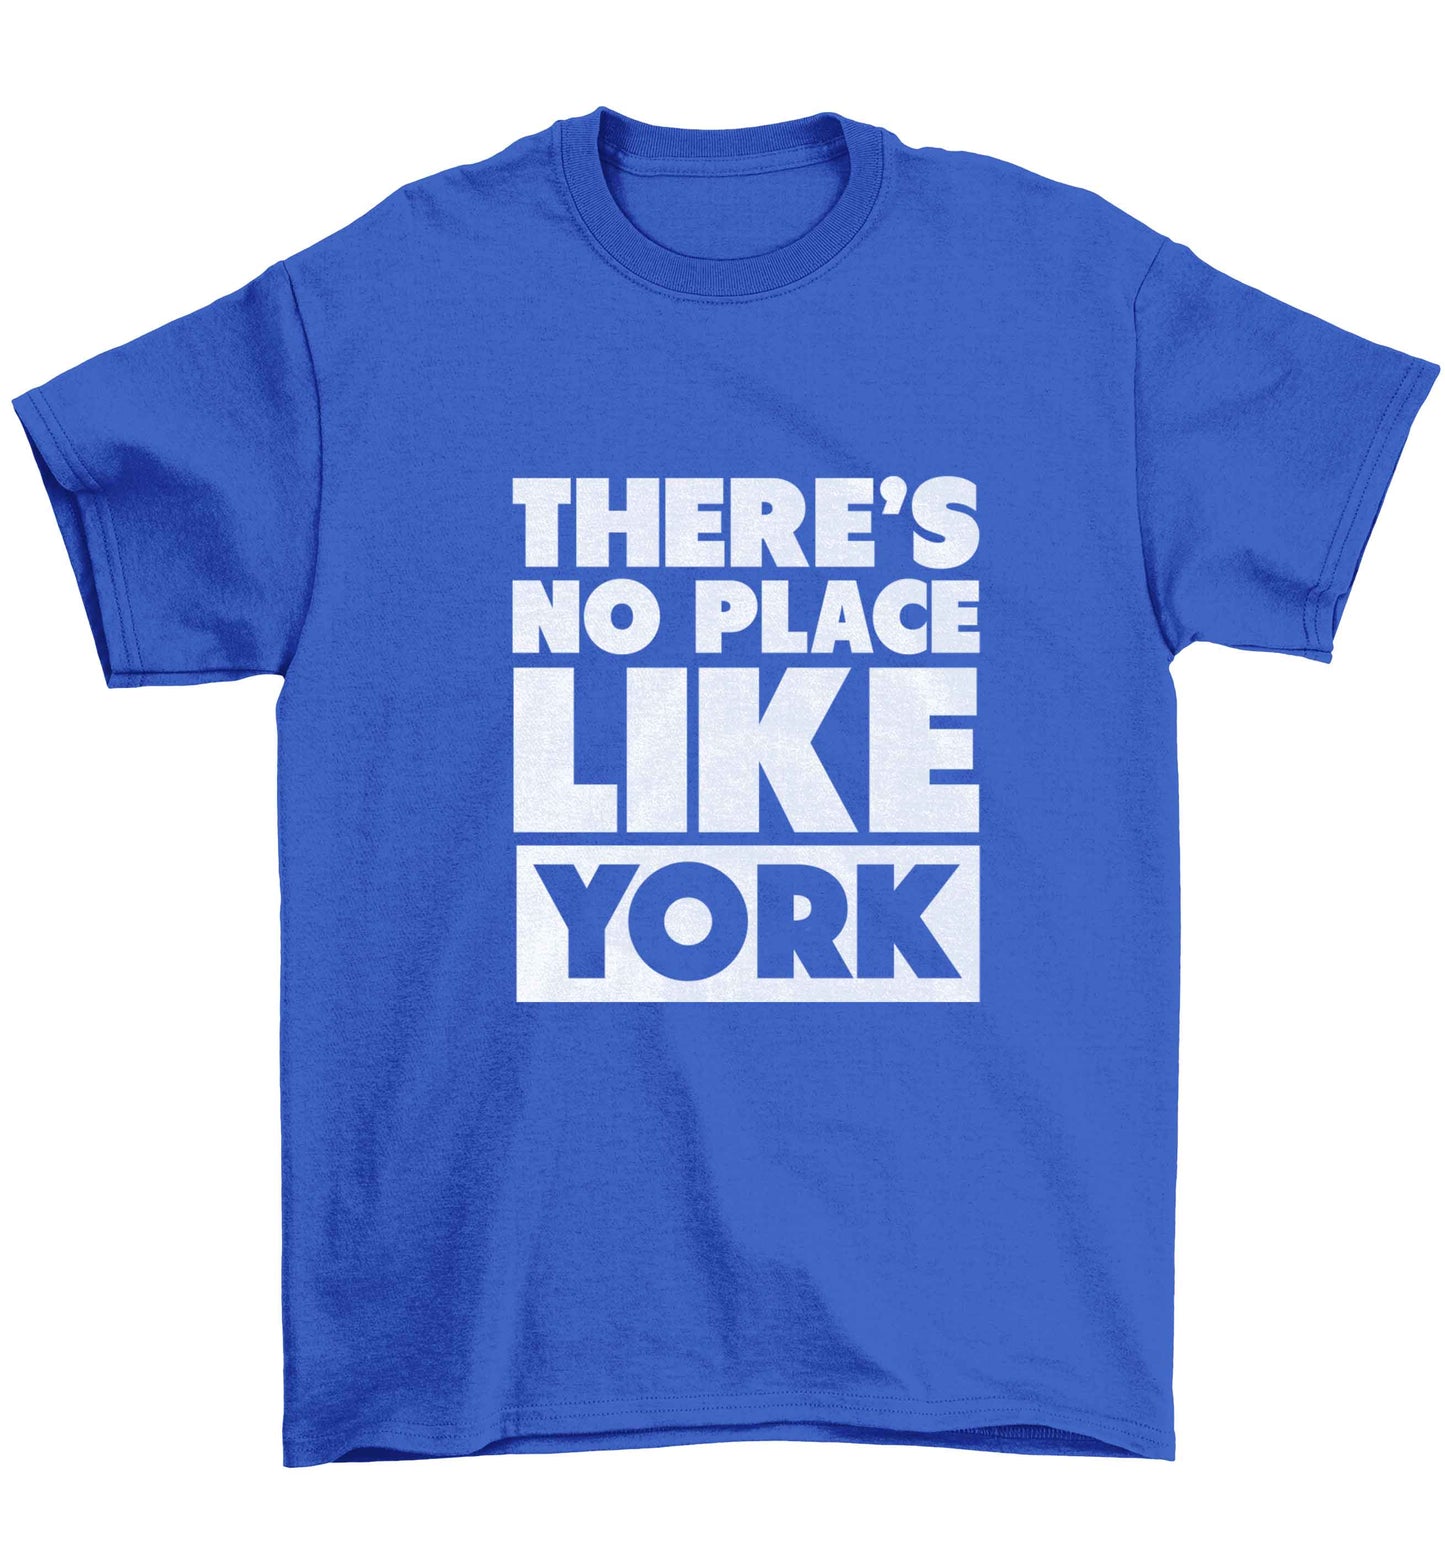 There's no place like york Children's blue Tshirt 12-13 Years